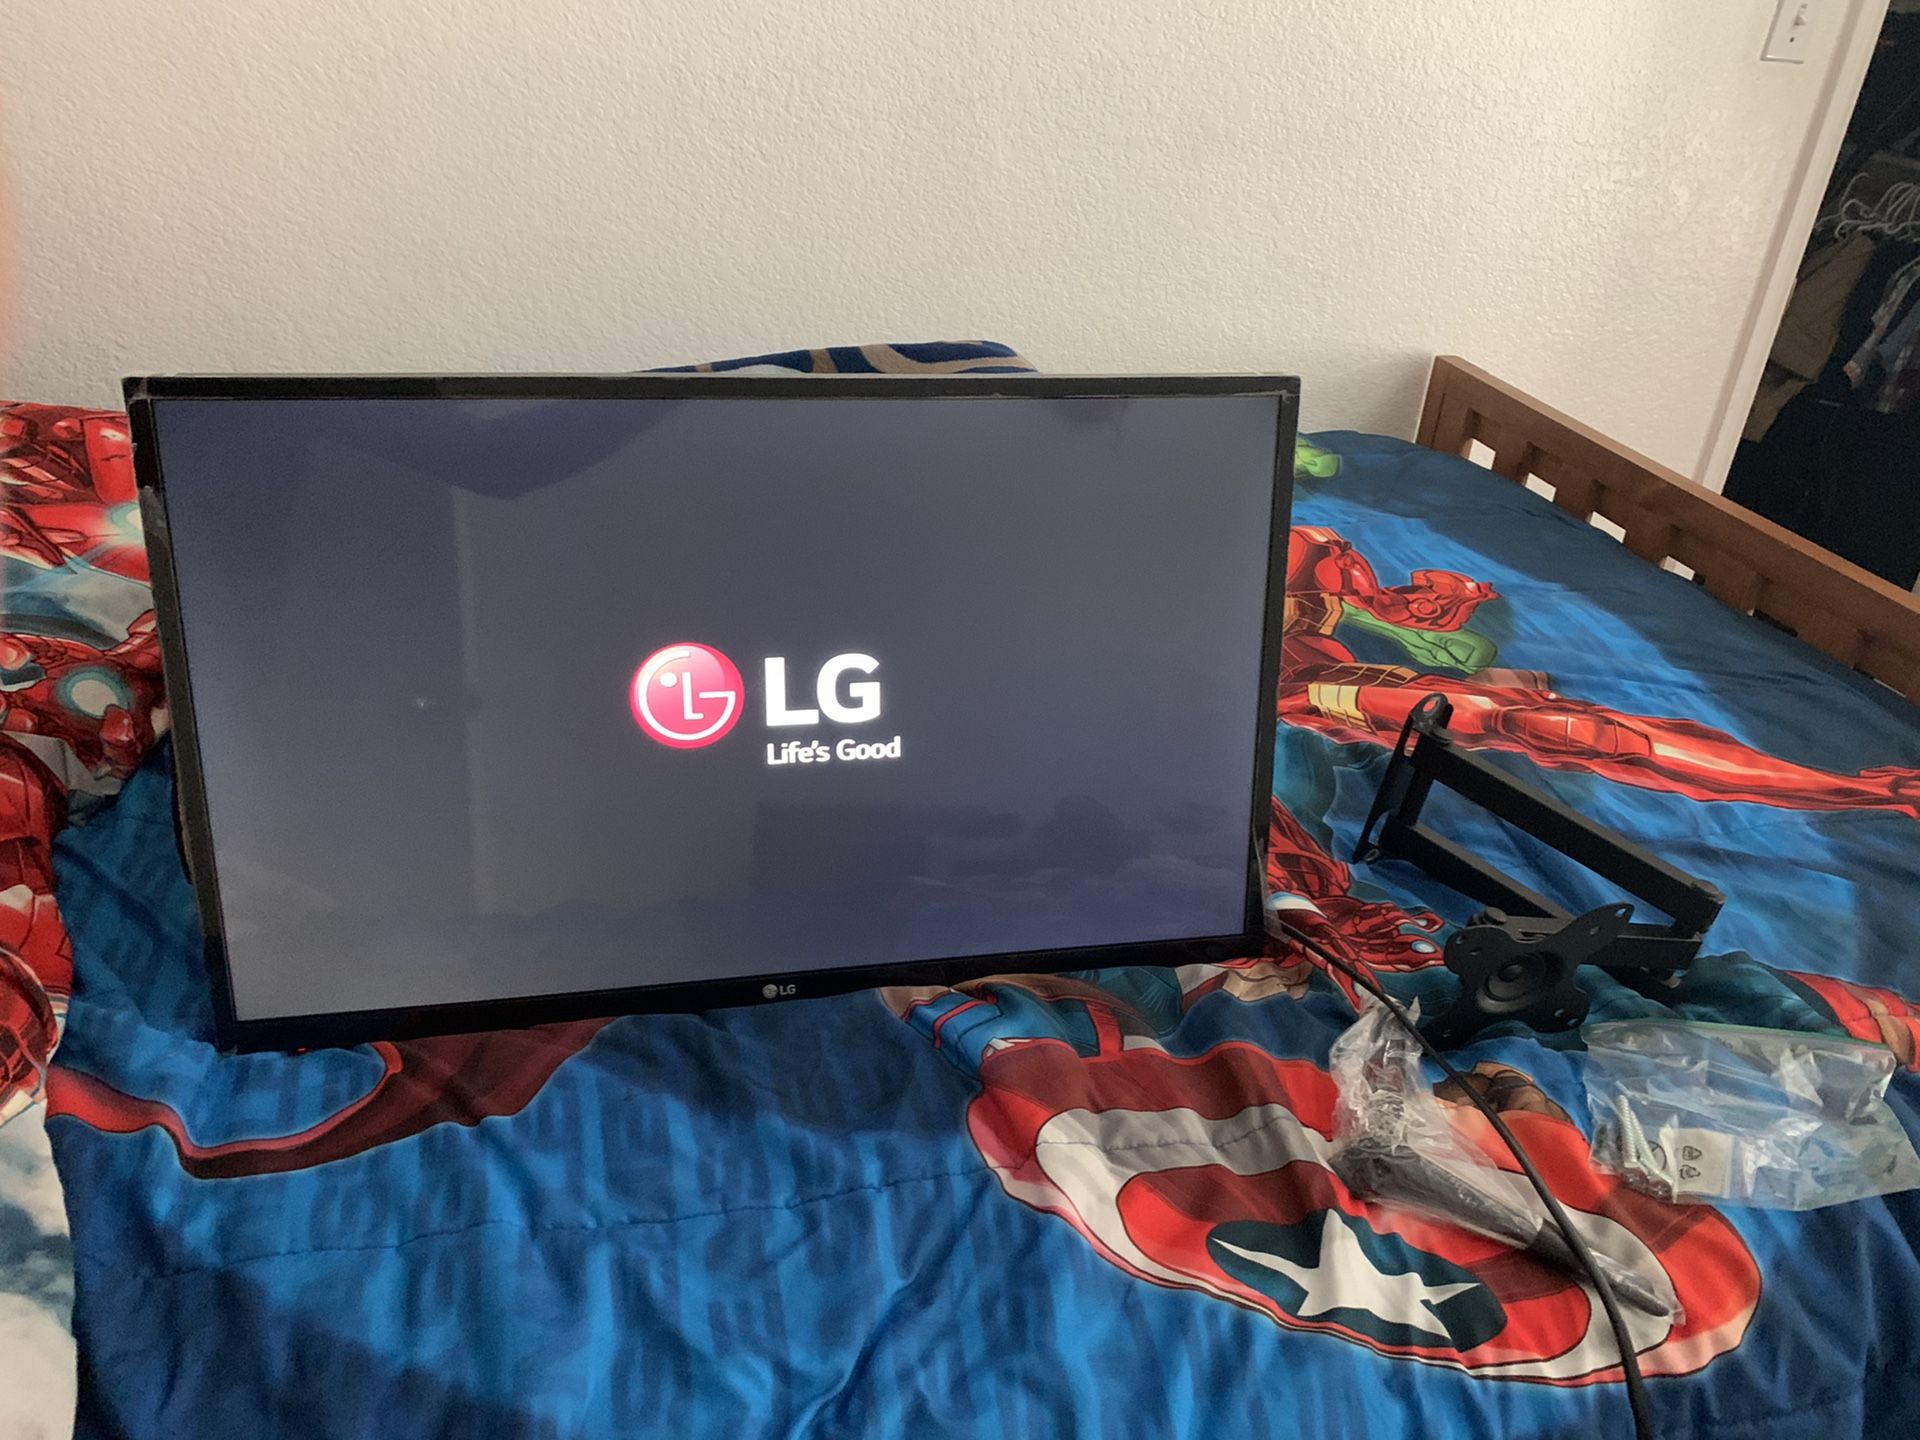 LG 28” LED TV with Wall Mount